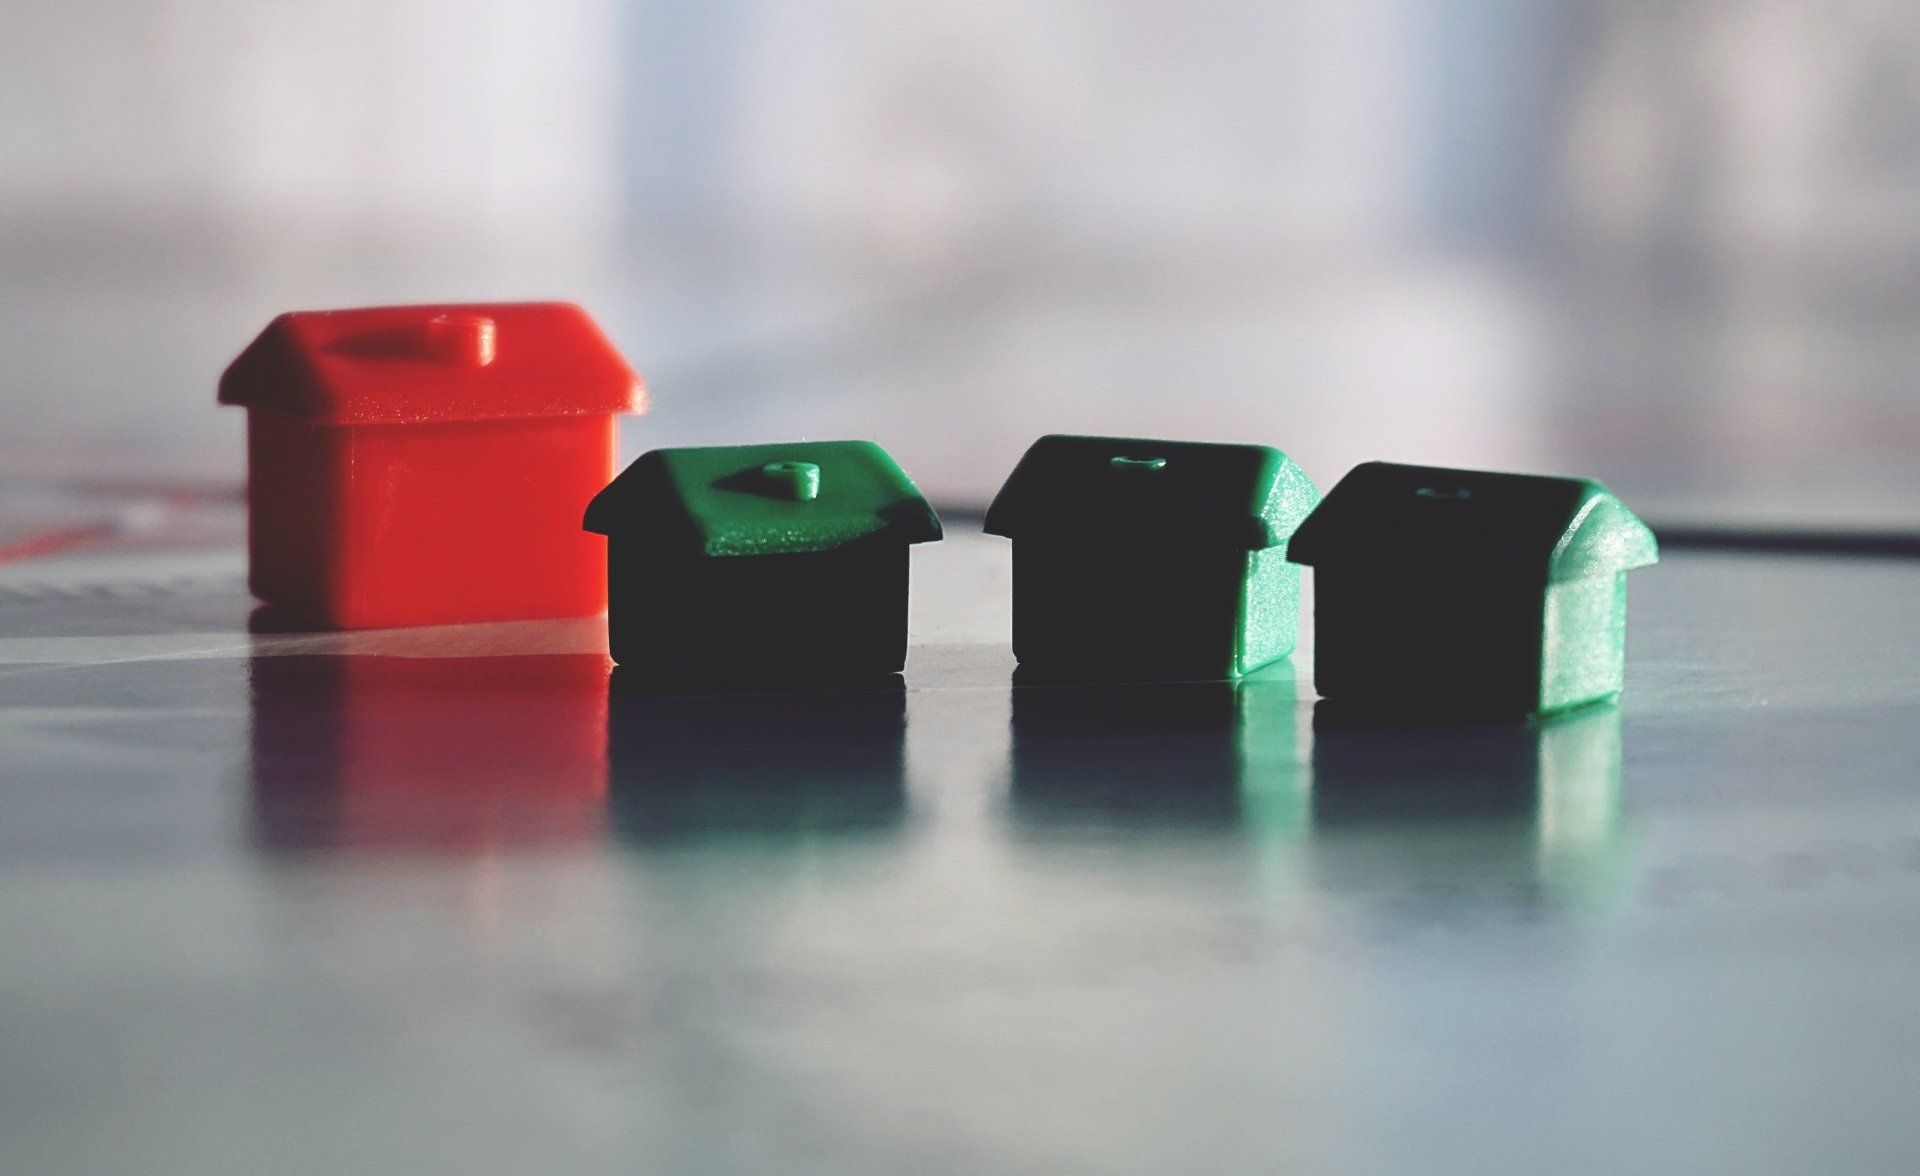 A red , green , and black toy house are sitting on a table.